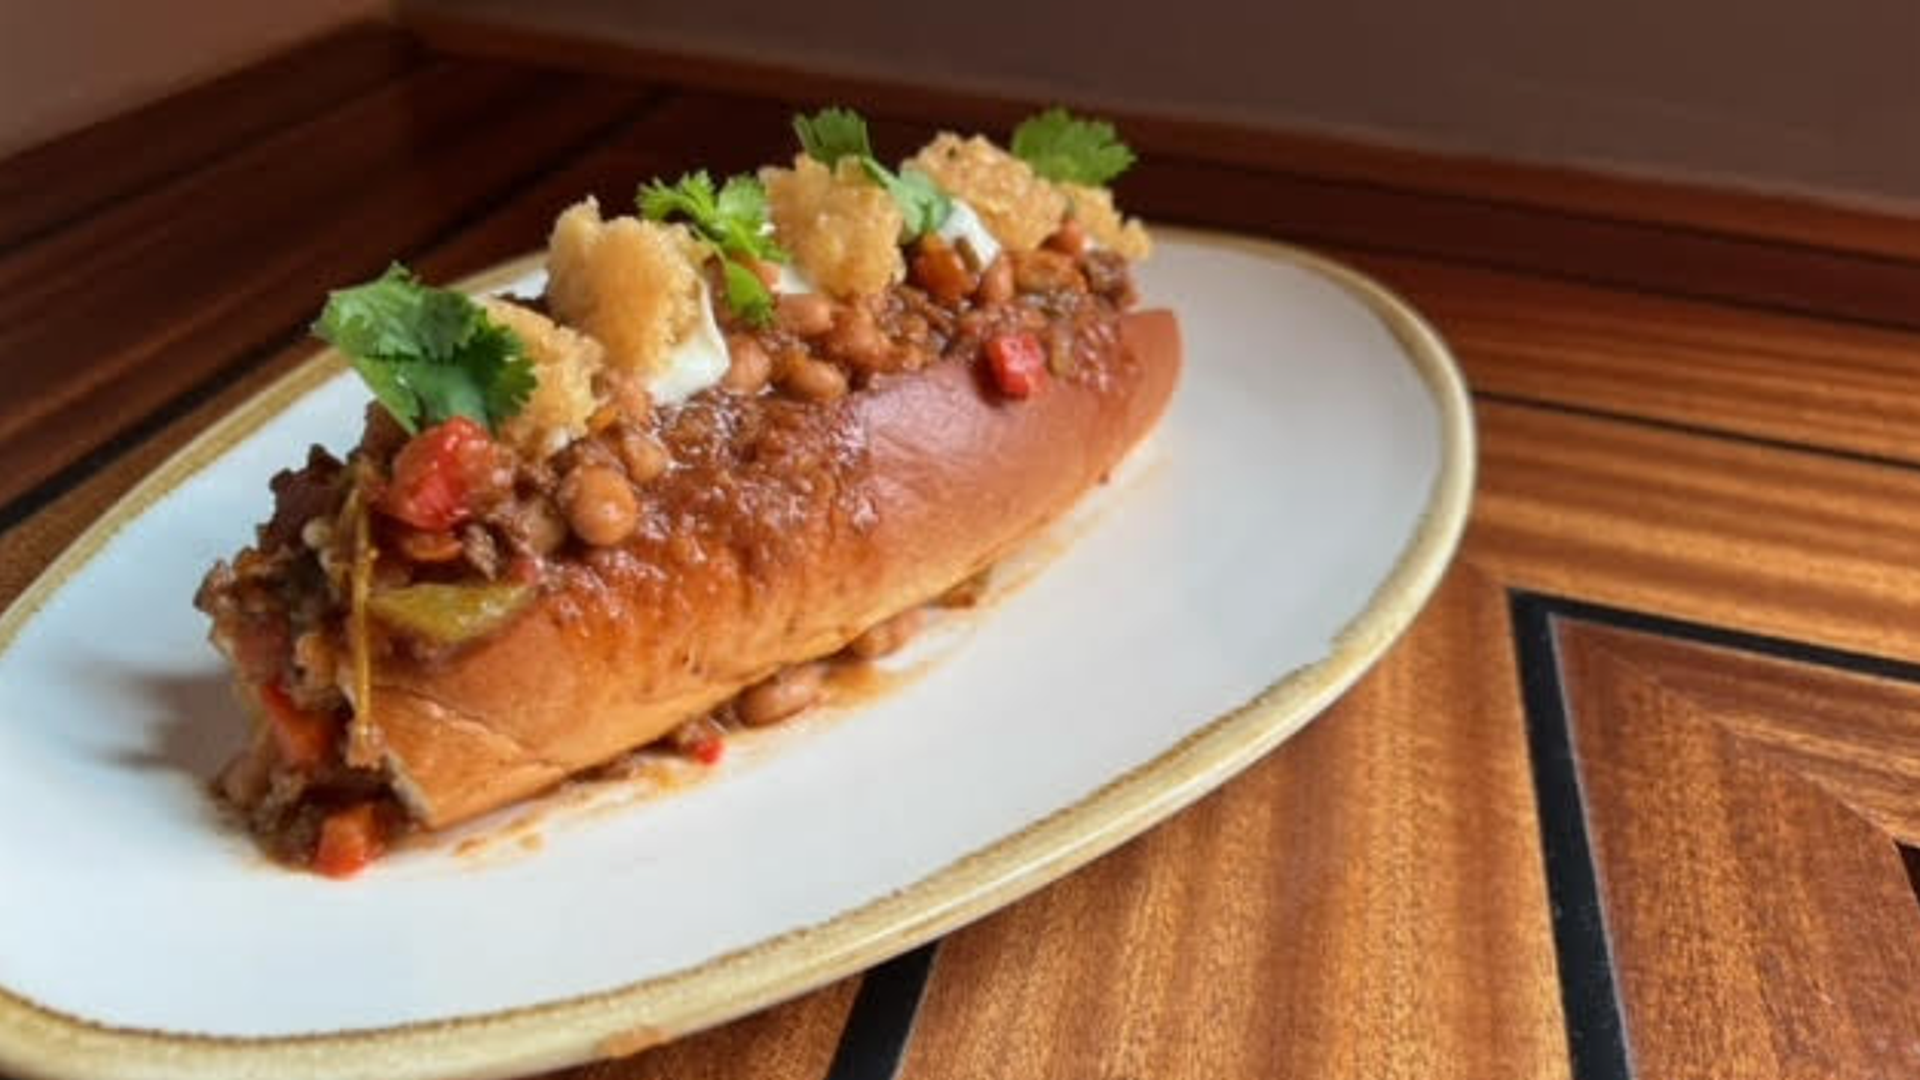 A hot dog loaded with mozzarella, bolognese sauce and fried garlic, topped with herbs is on a white plate.